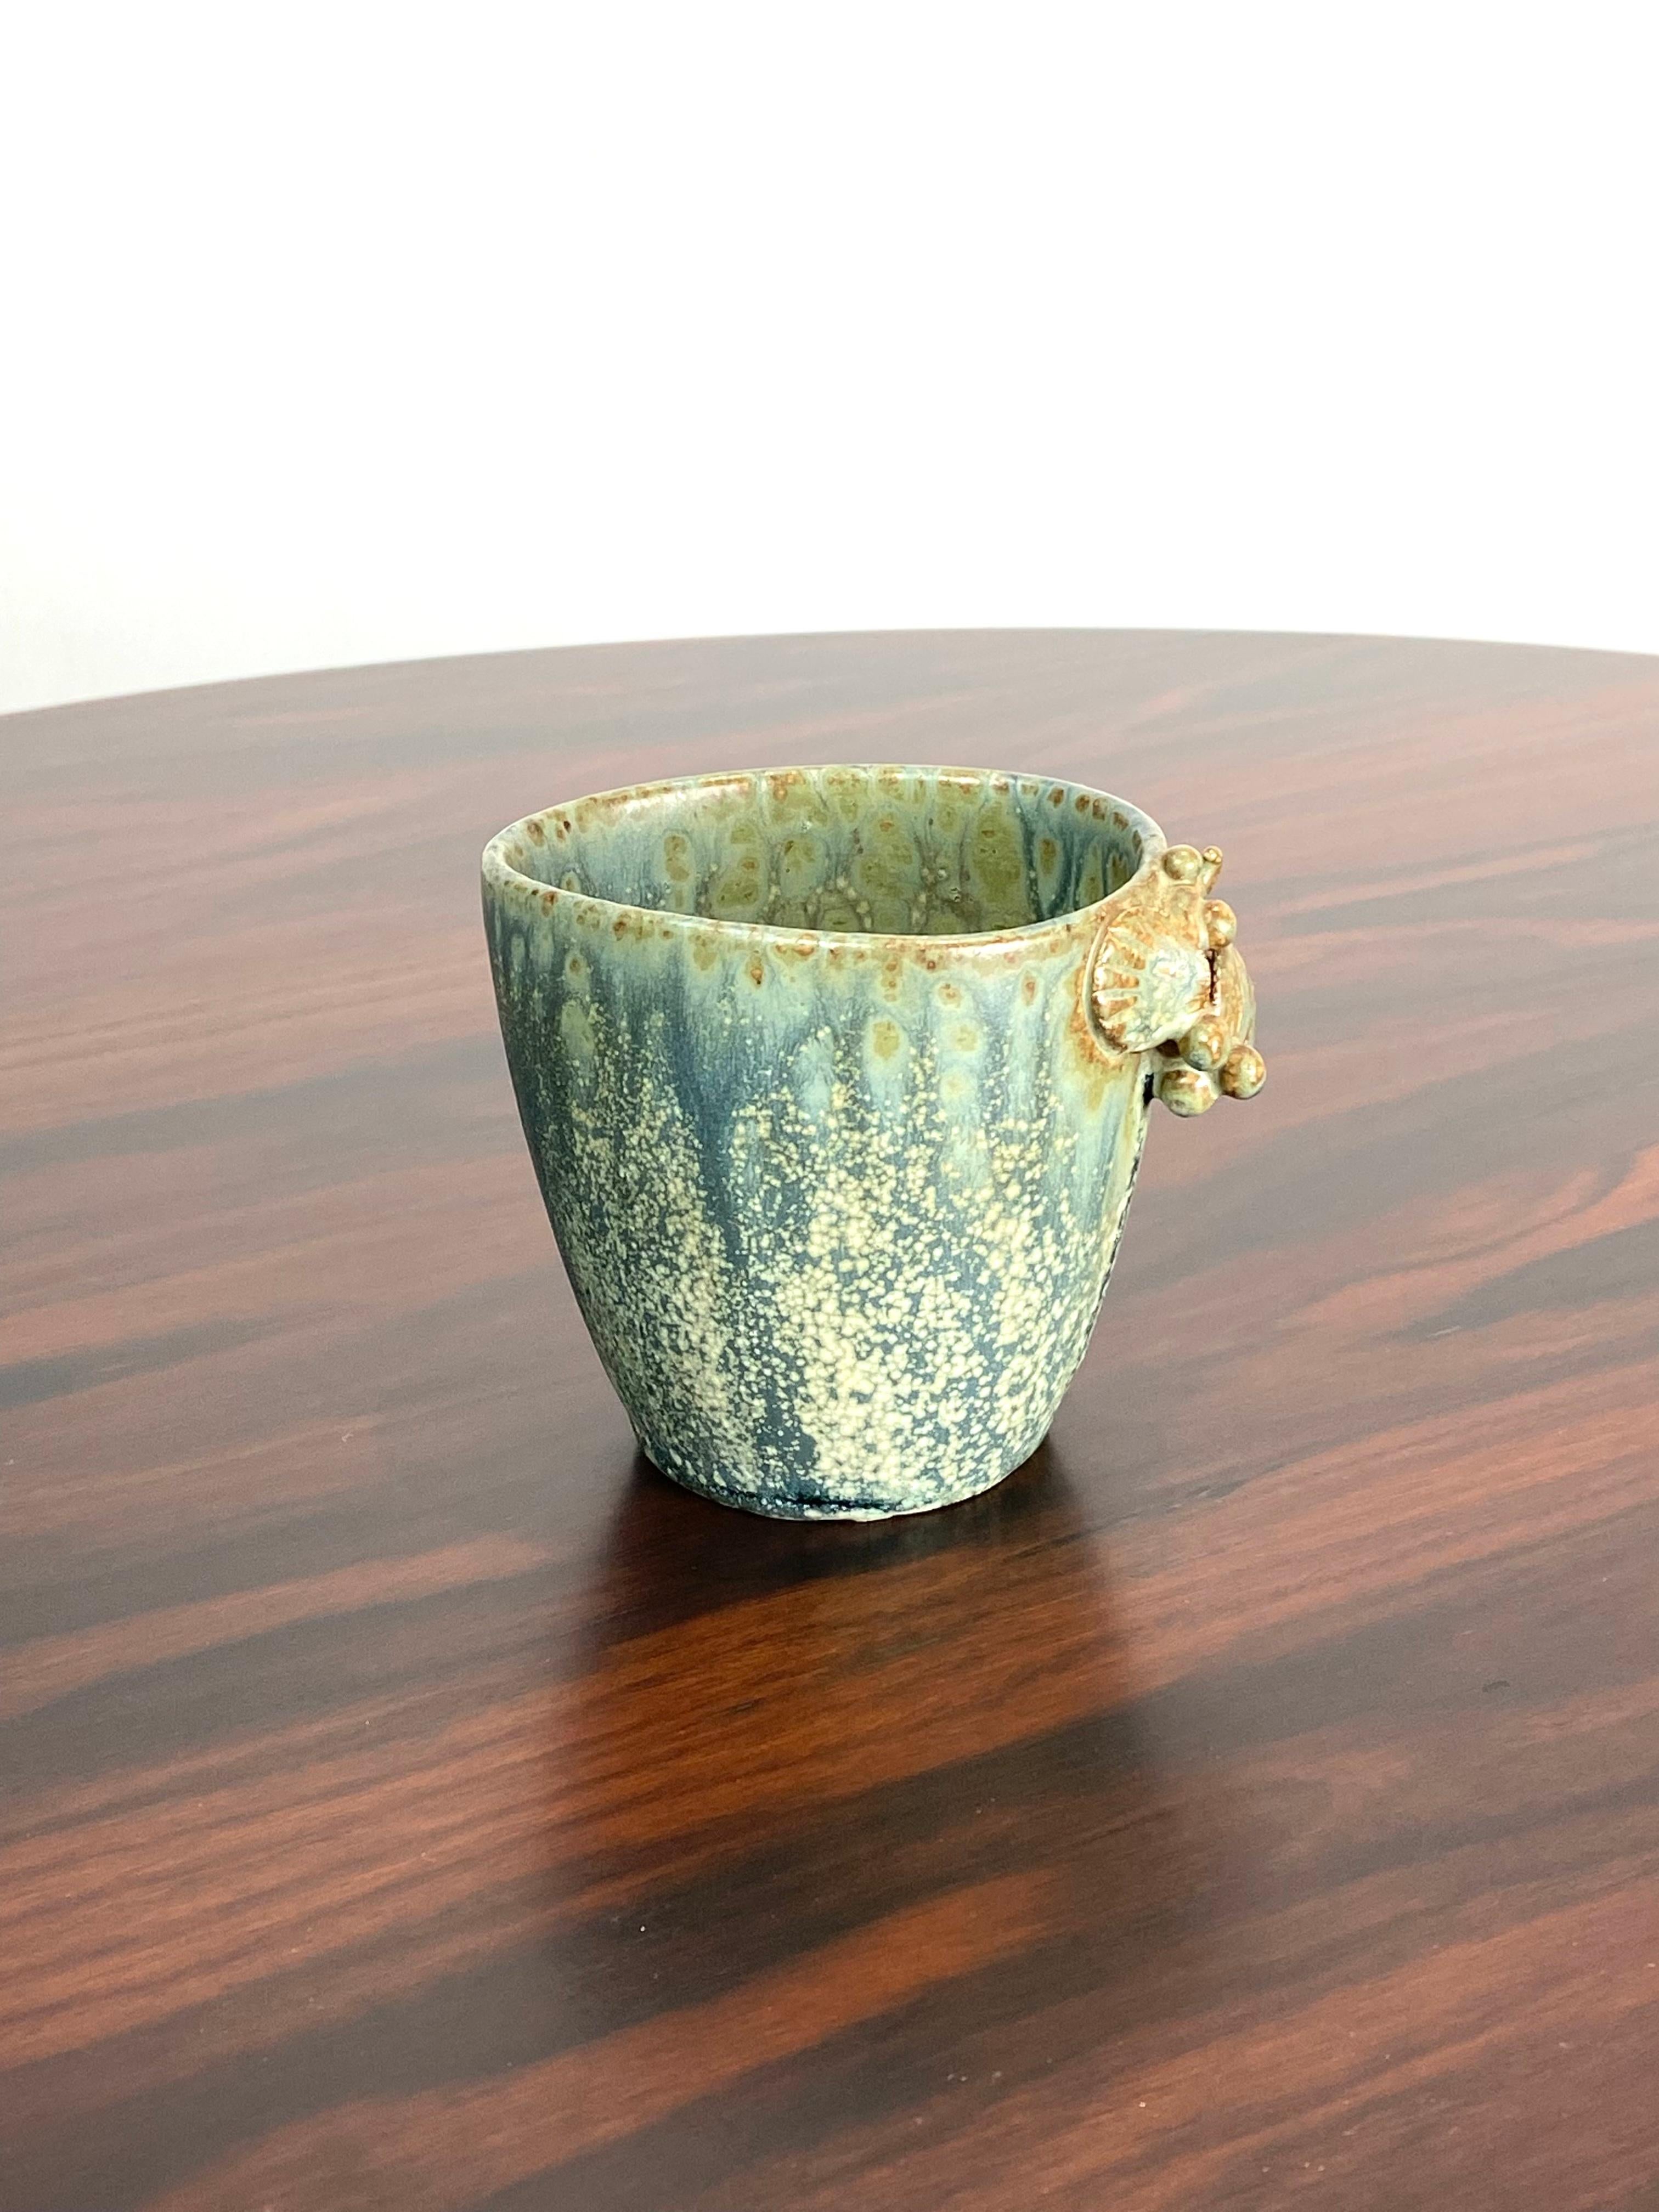 Small Ceramic Vase with Turquoise Glaze by Arne Bang 2